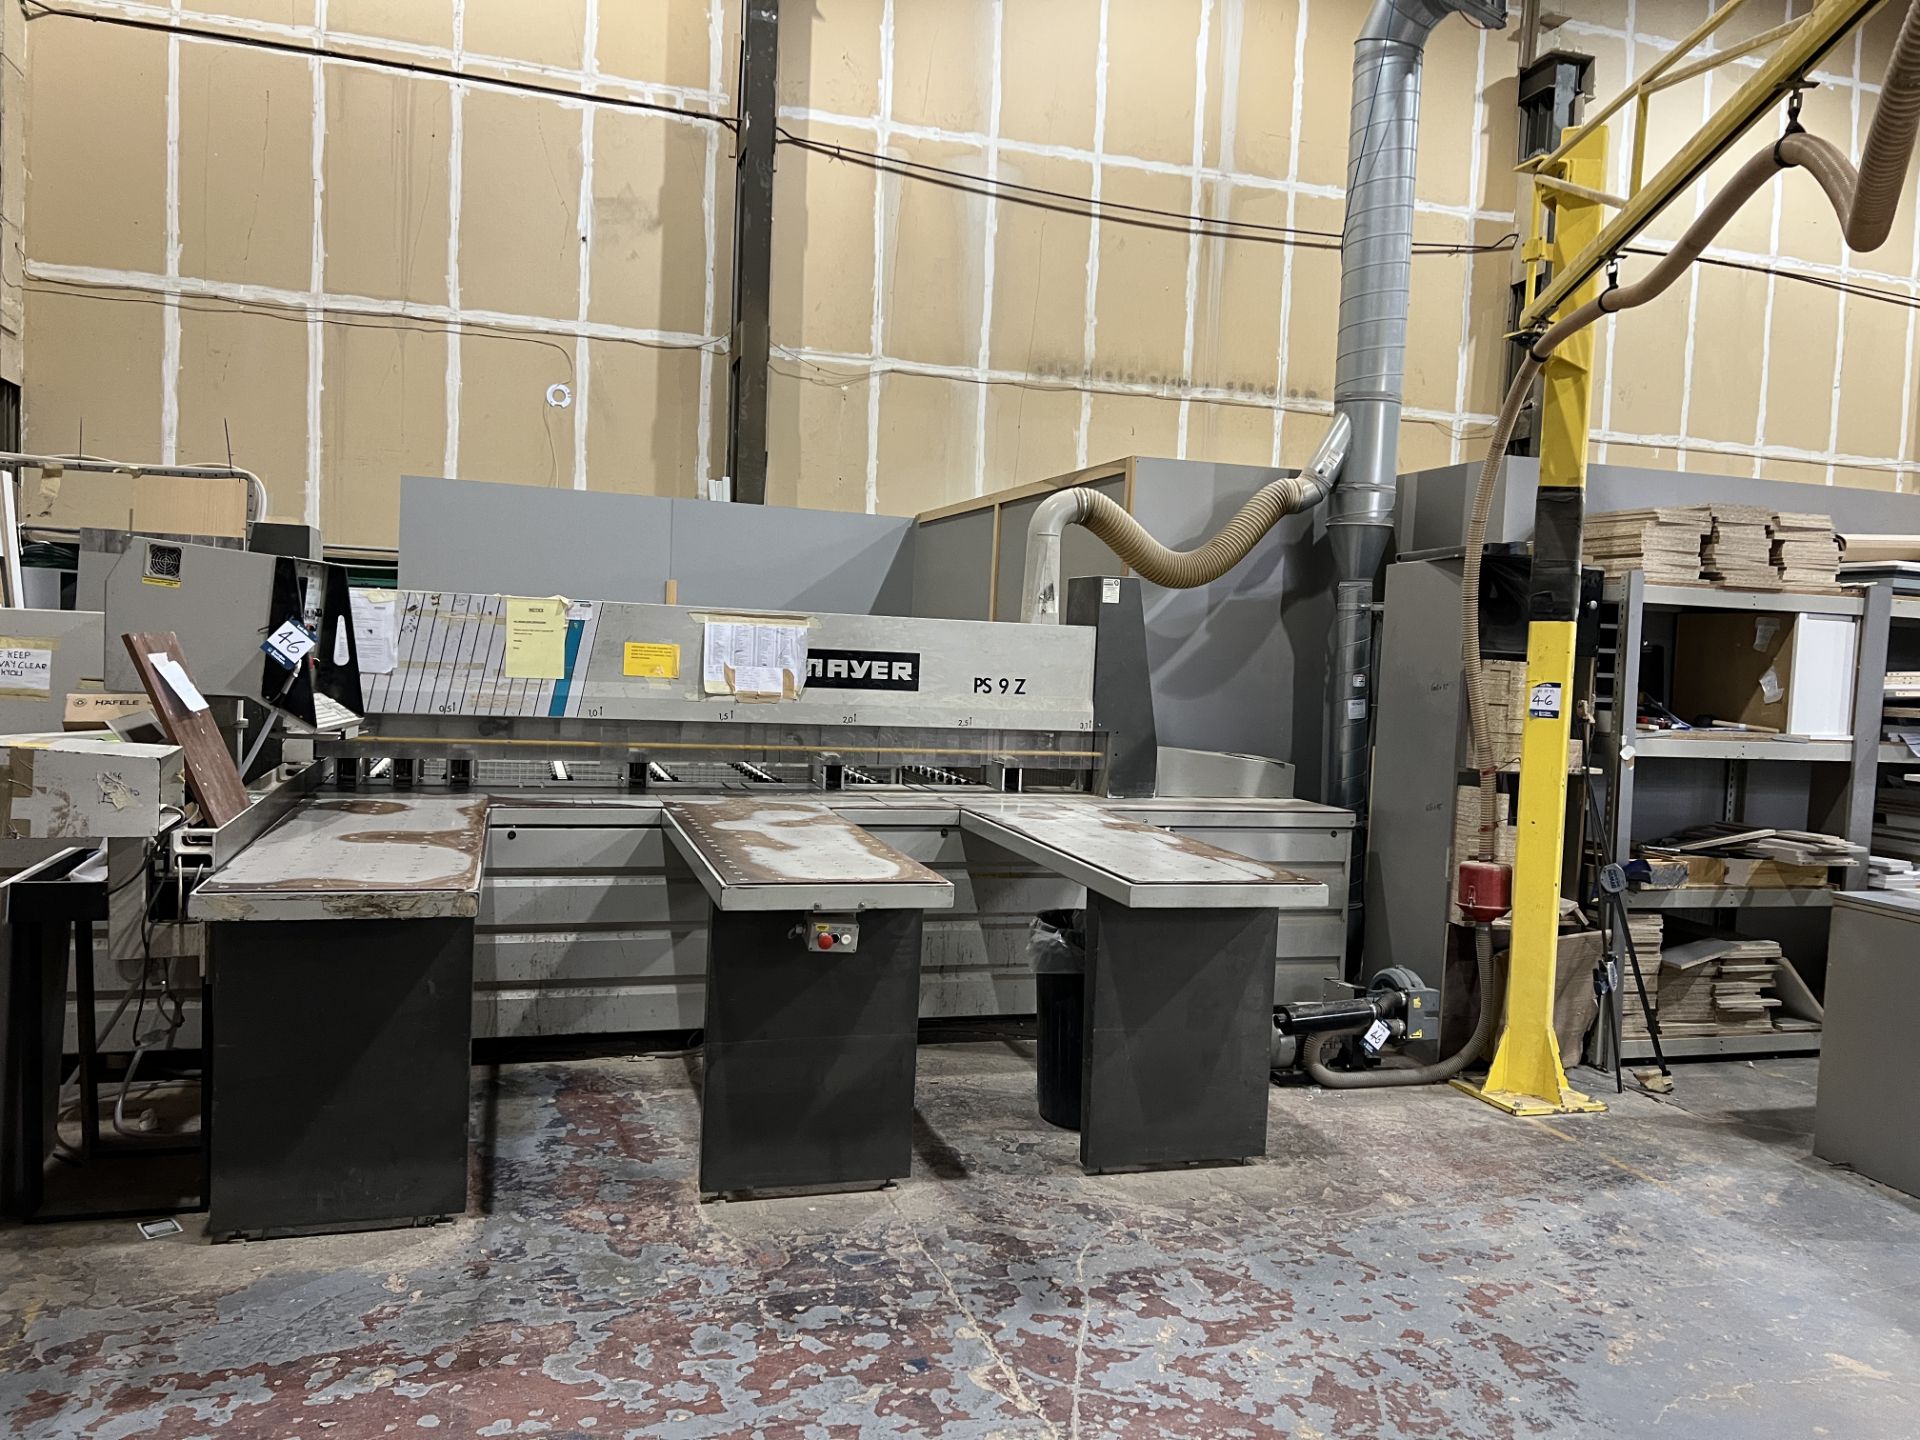 Otto Mayer PS 9Z front loaded beam saw with suction panel lifting gantry fitted with IPC 5000